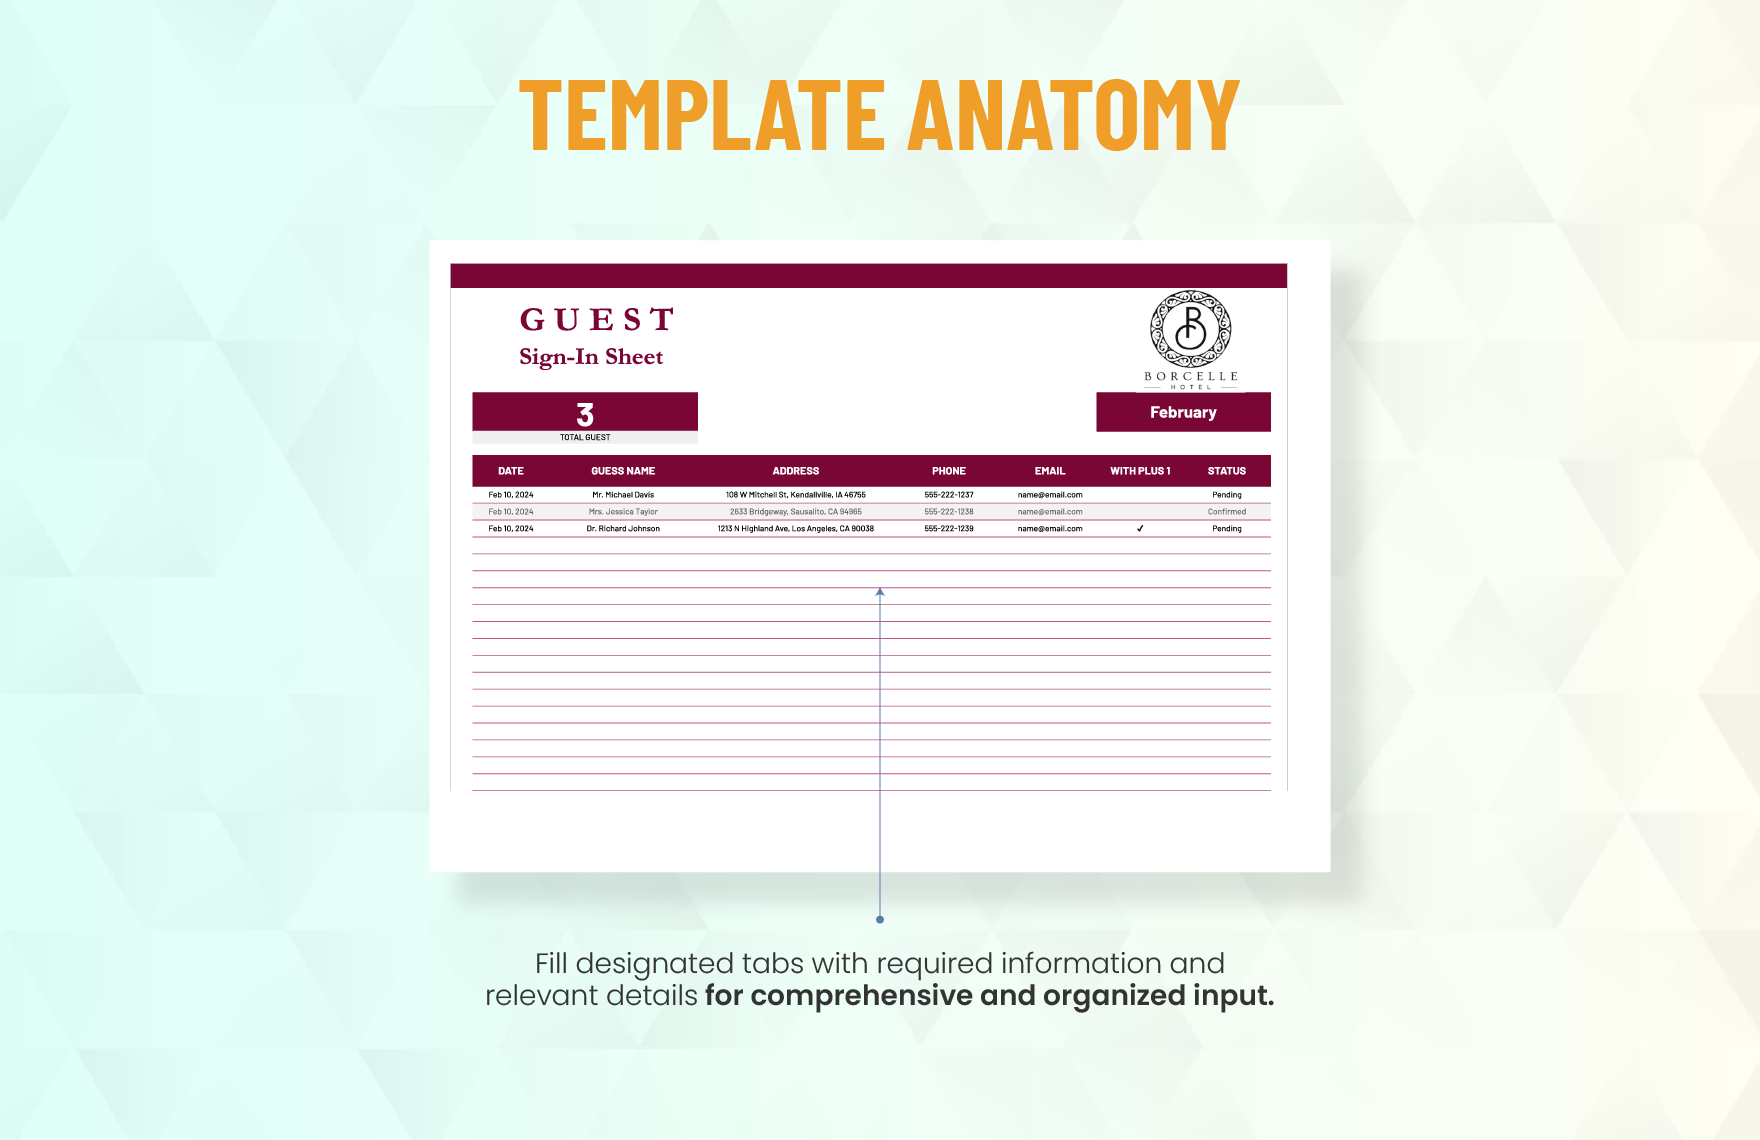 Guest Sign in Sheet Template